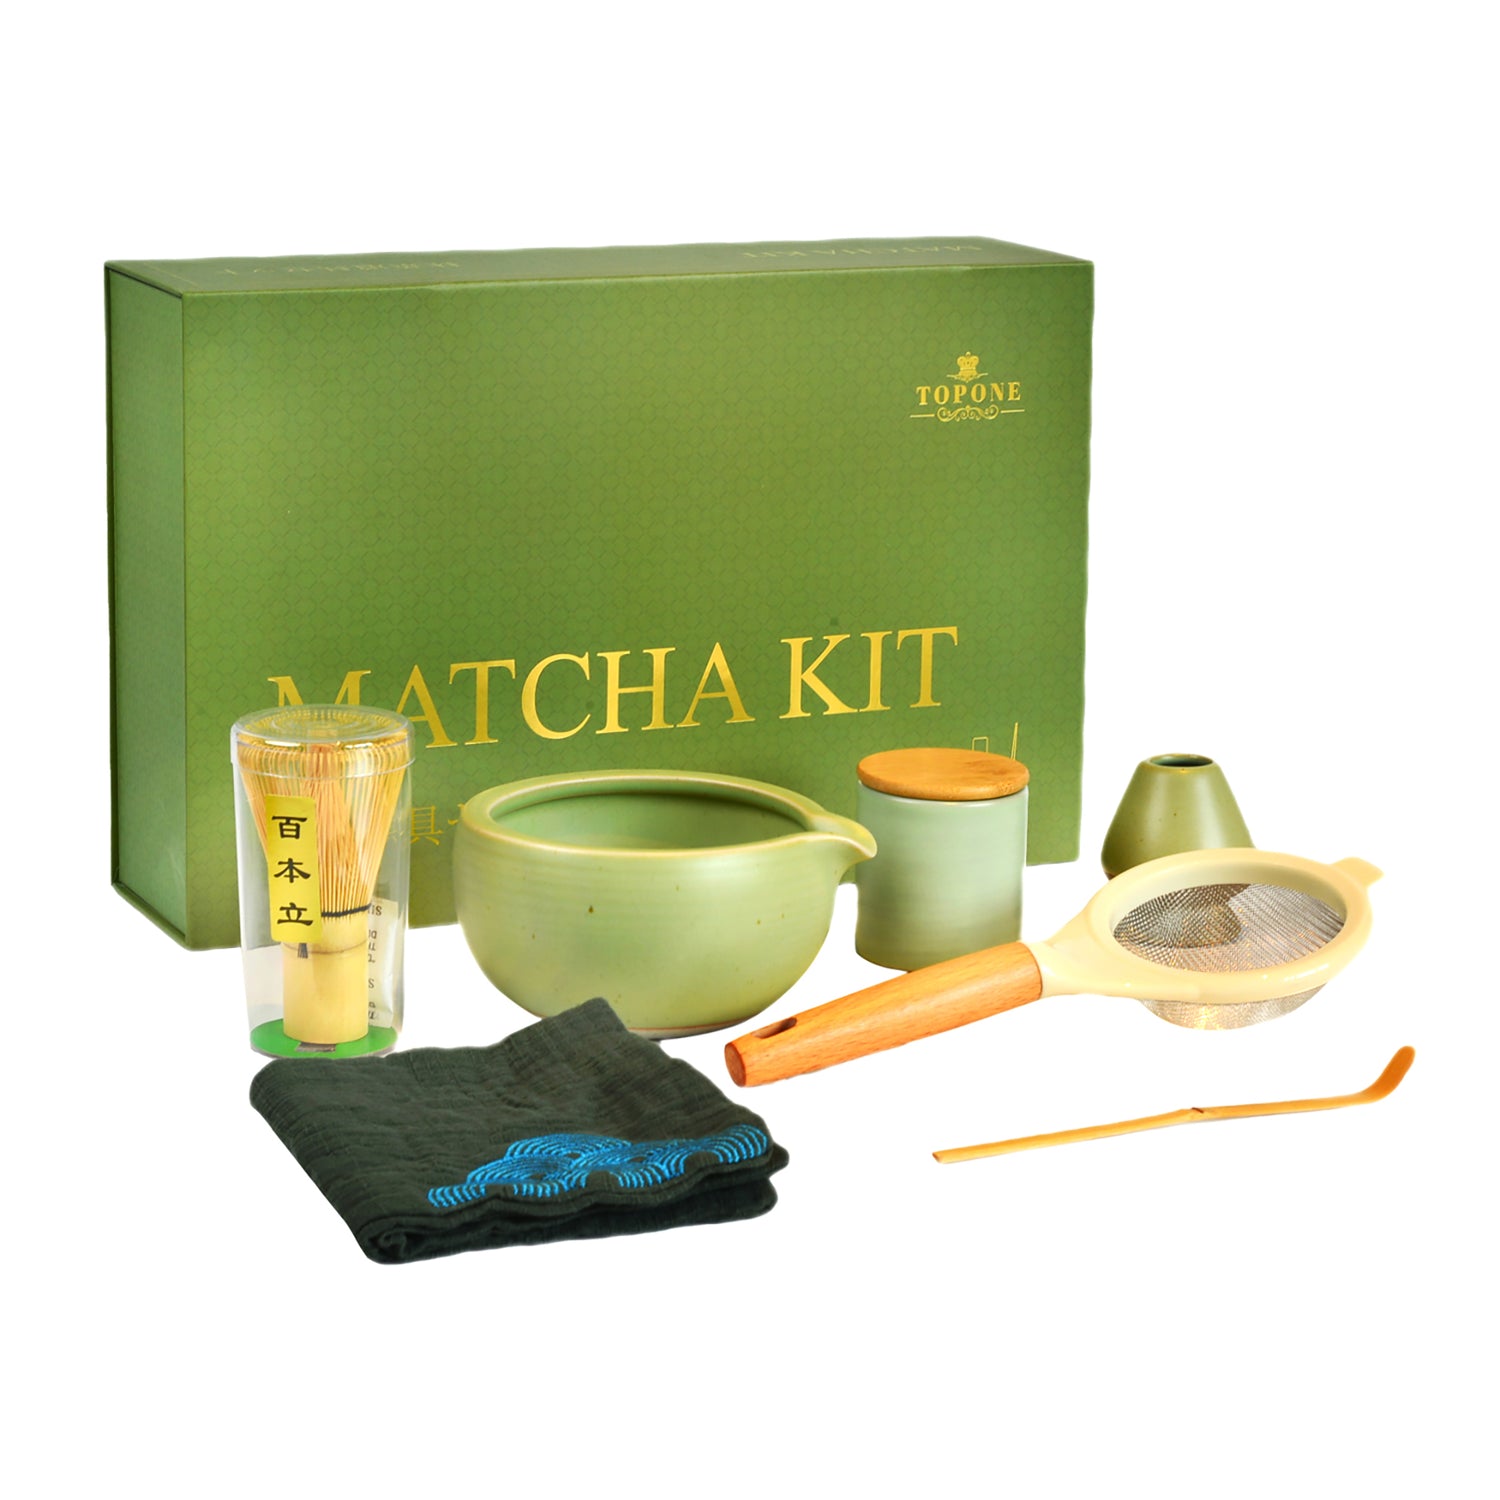 Exquisite Matcha Tea Set for a Perfect Traditional Brewing Experience